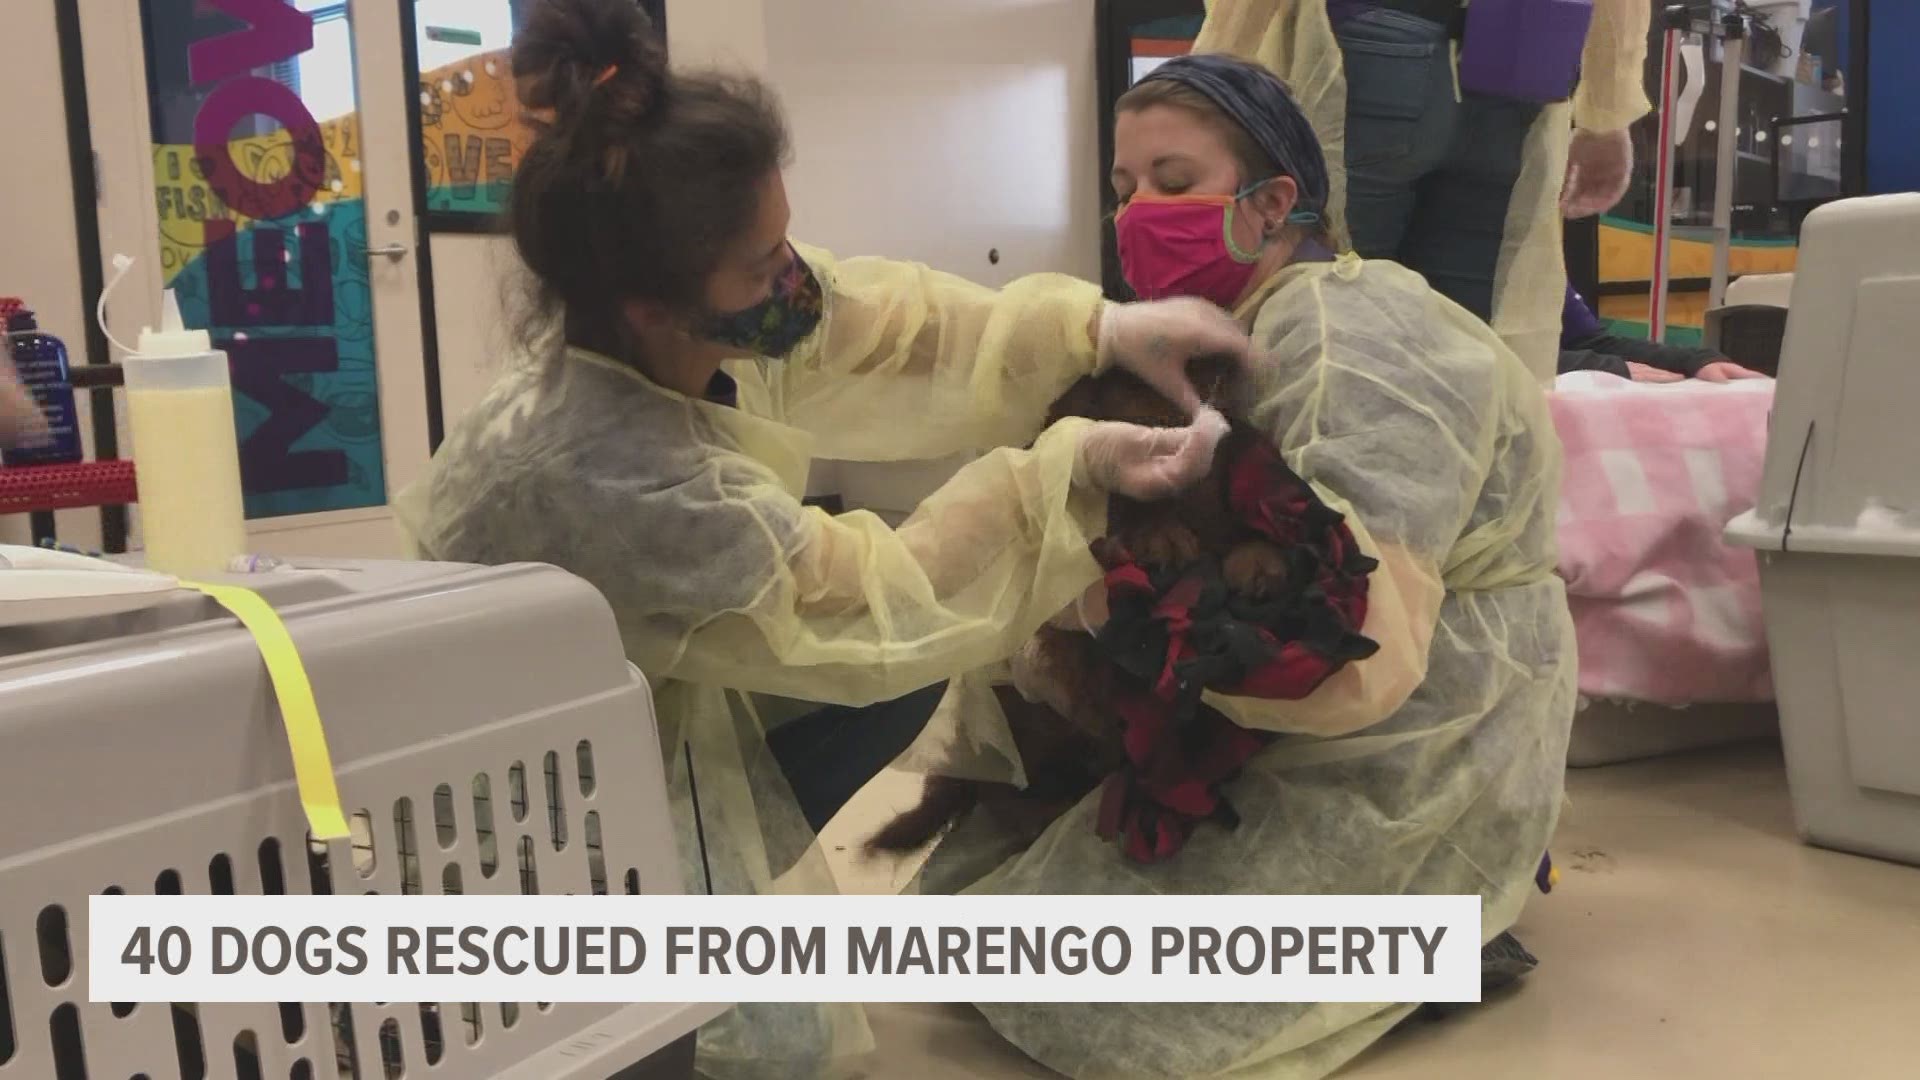 Animal Rescue League rescue teams traveled to Marengo during Thursday's snowstorm to make sure the dogs were safe from frigid temps coming in this weekend.